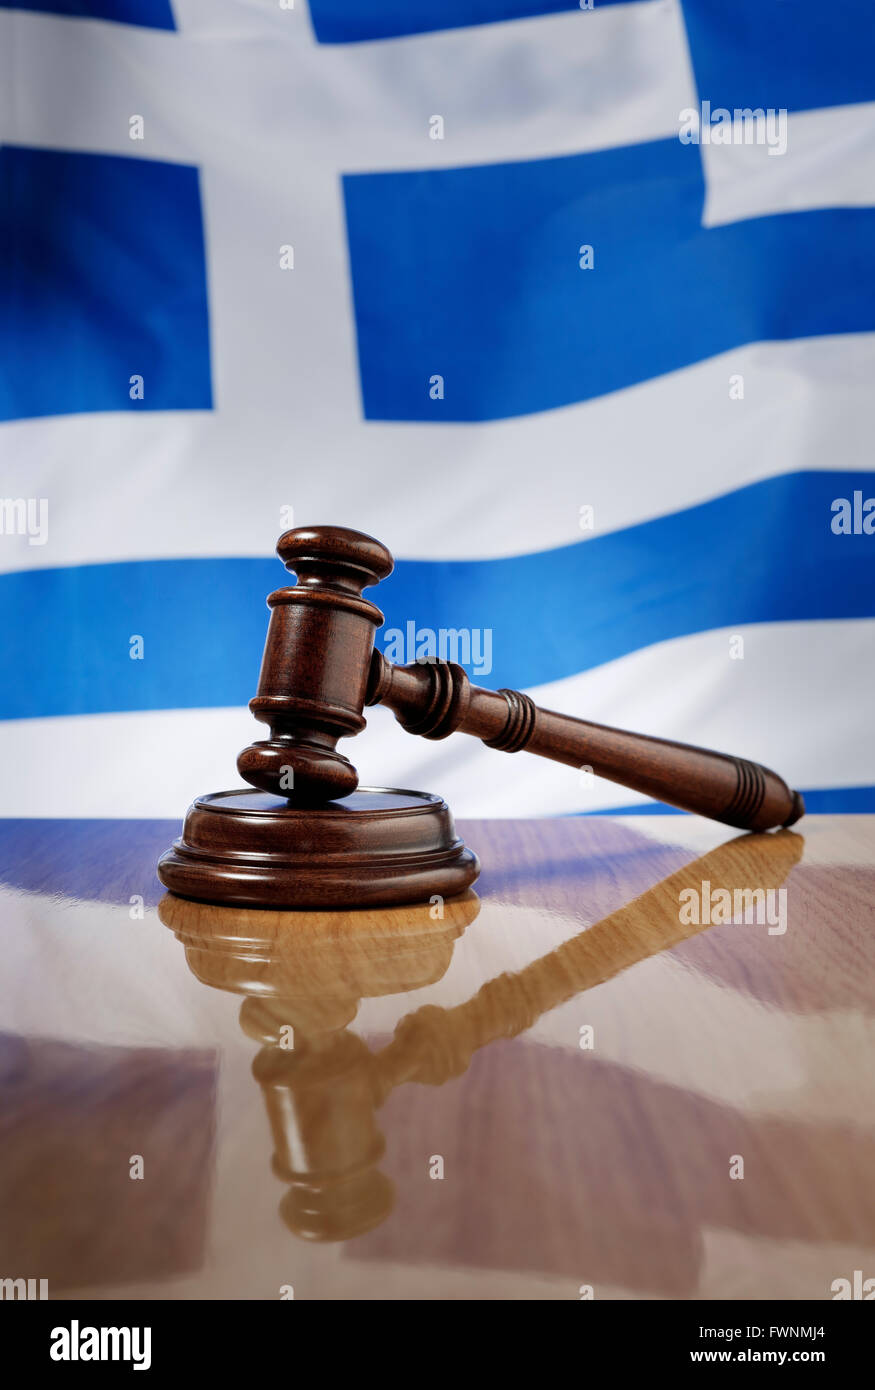 Mahogany wooden gavel on glossy wooden table, flag of Greece in the background. Stock Photo